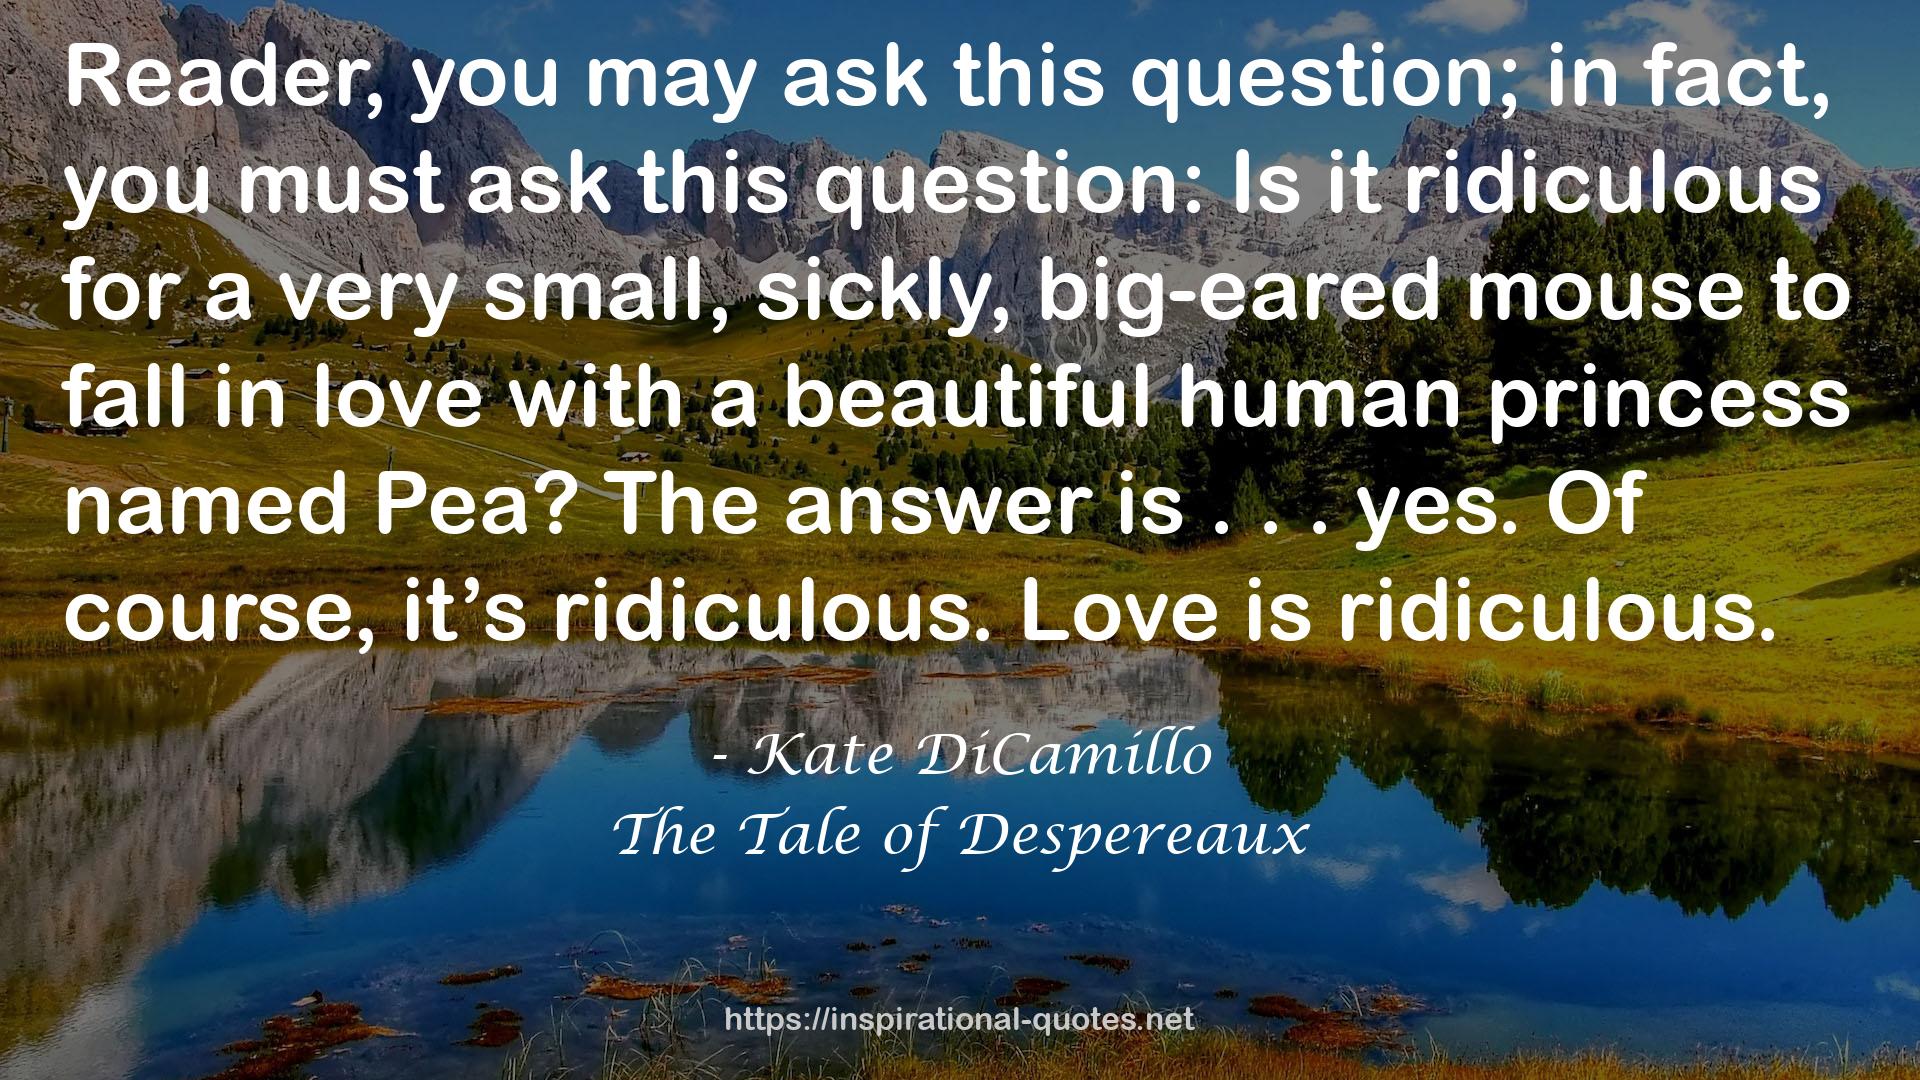 The Tale of Despereaux QUOTES